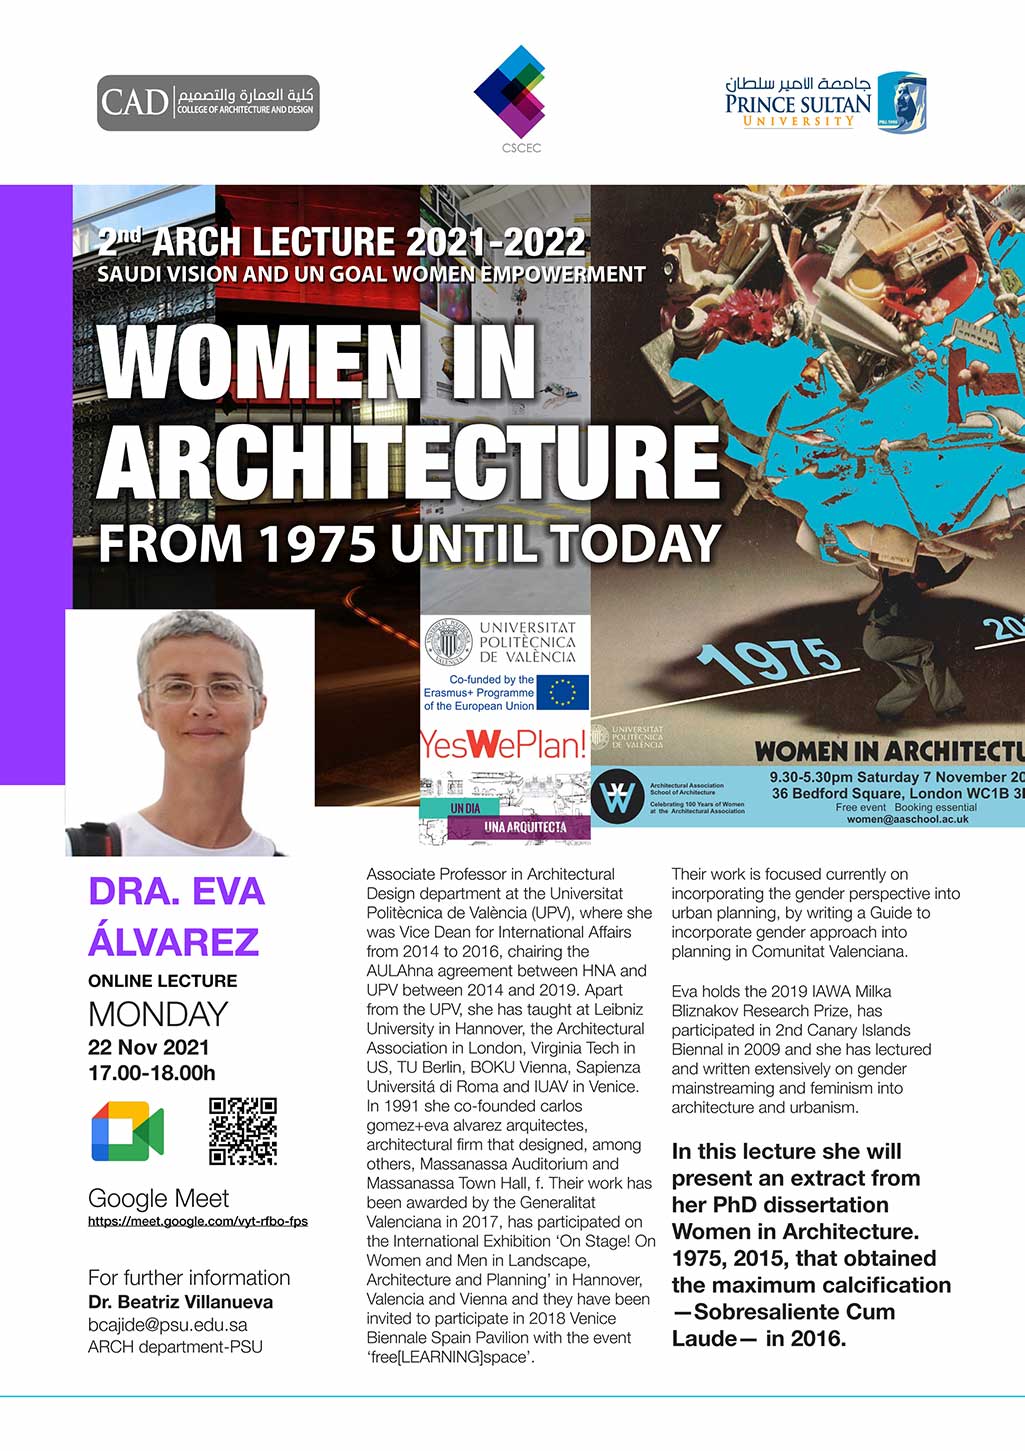 Women in Architecture from 1975 until today